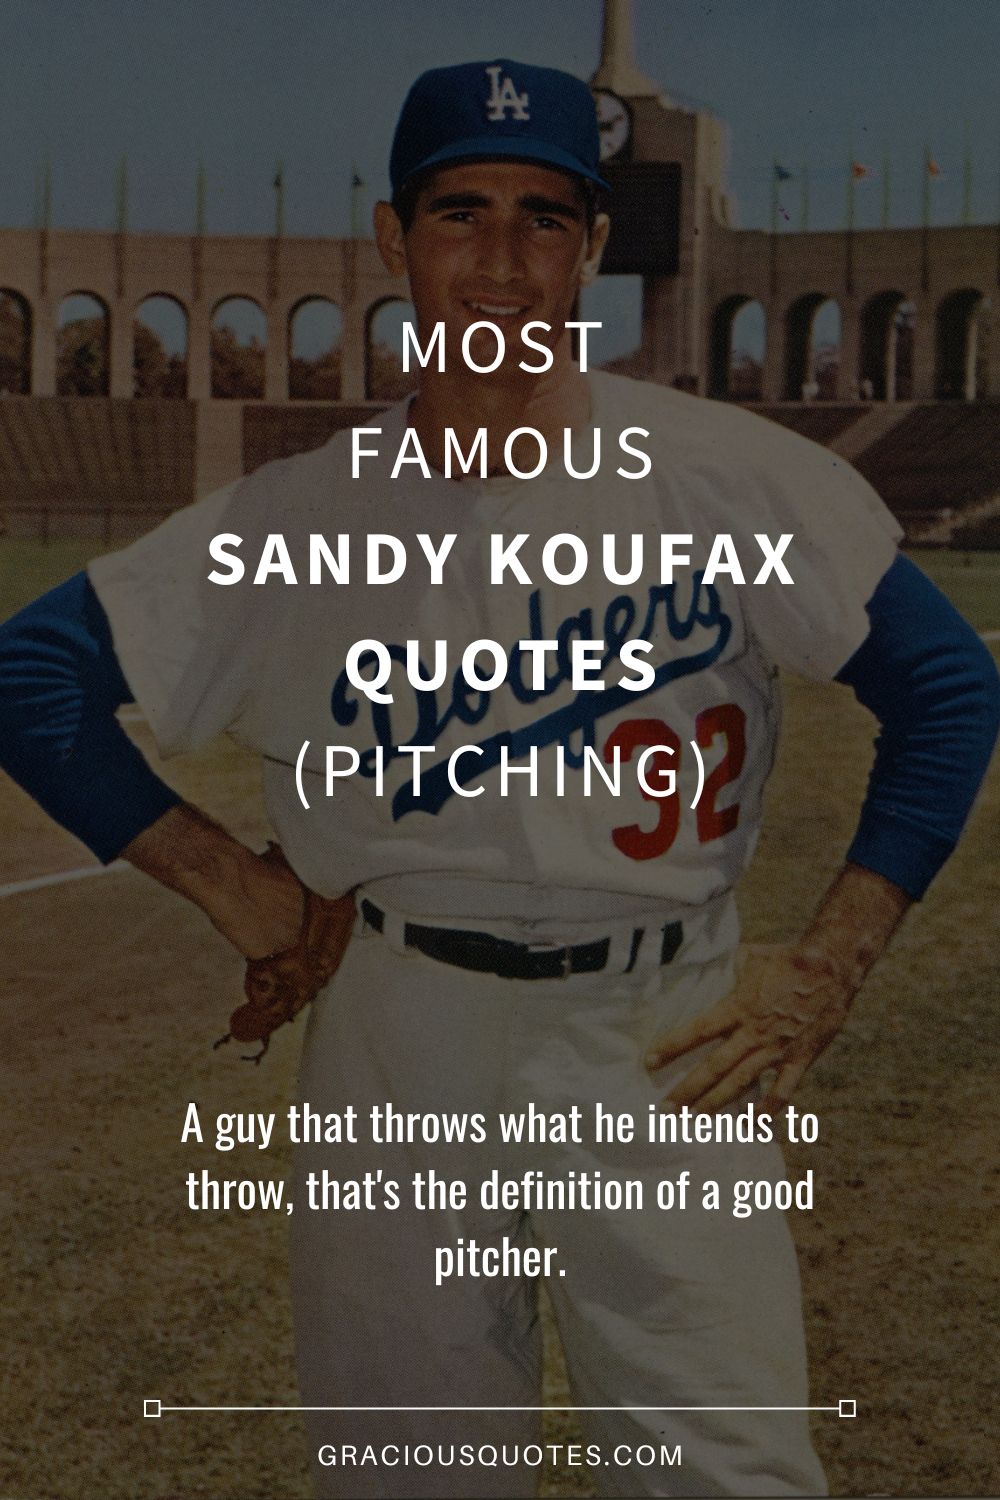 Most Famous Sandy Koufax Quotes (PITCHING) - Gracious Quotes